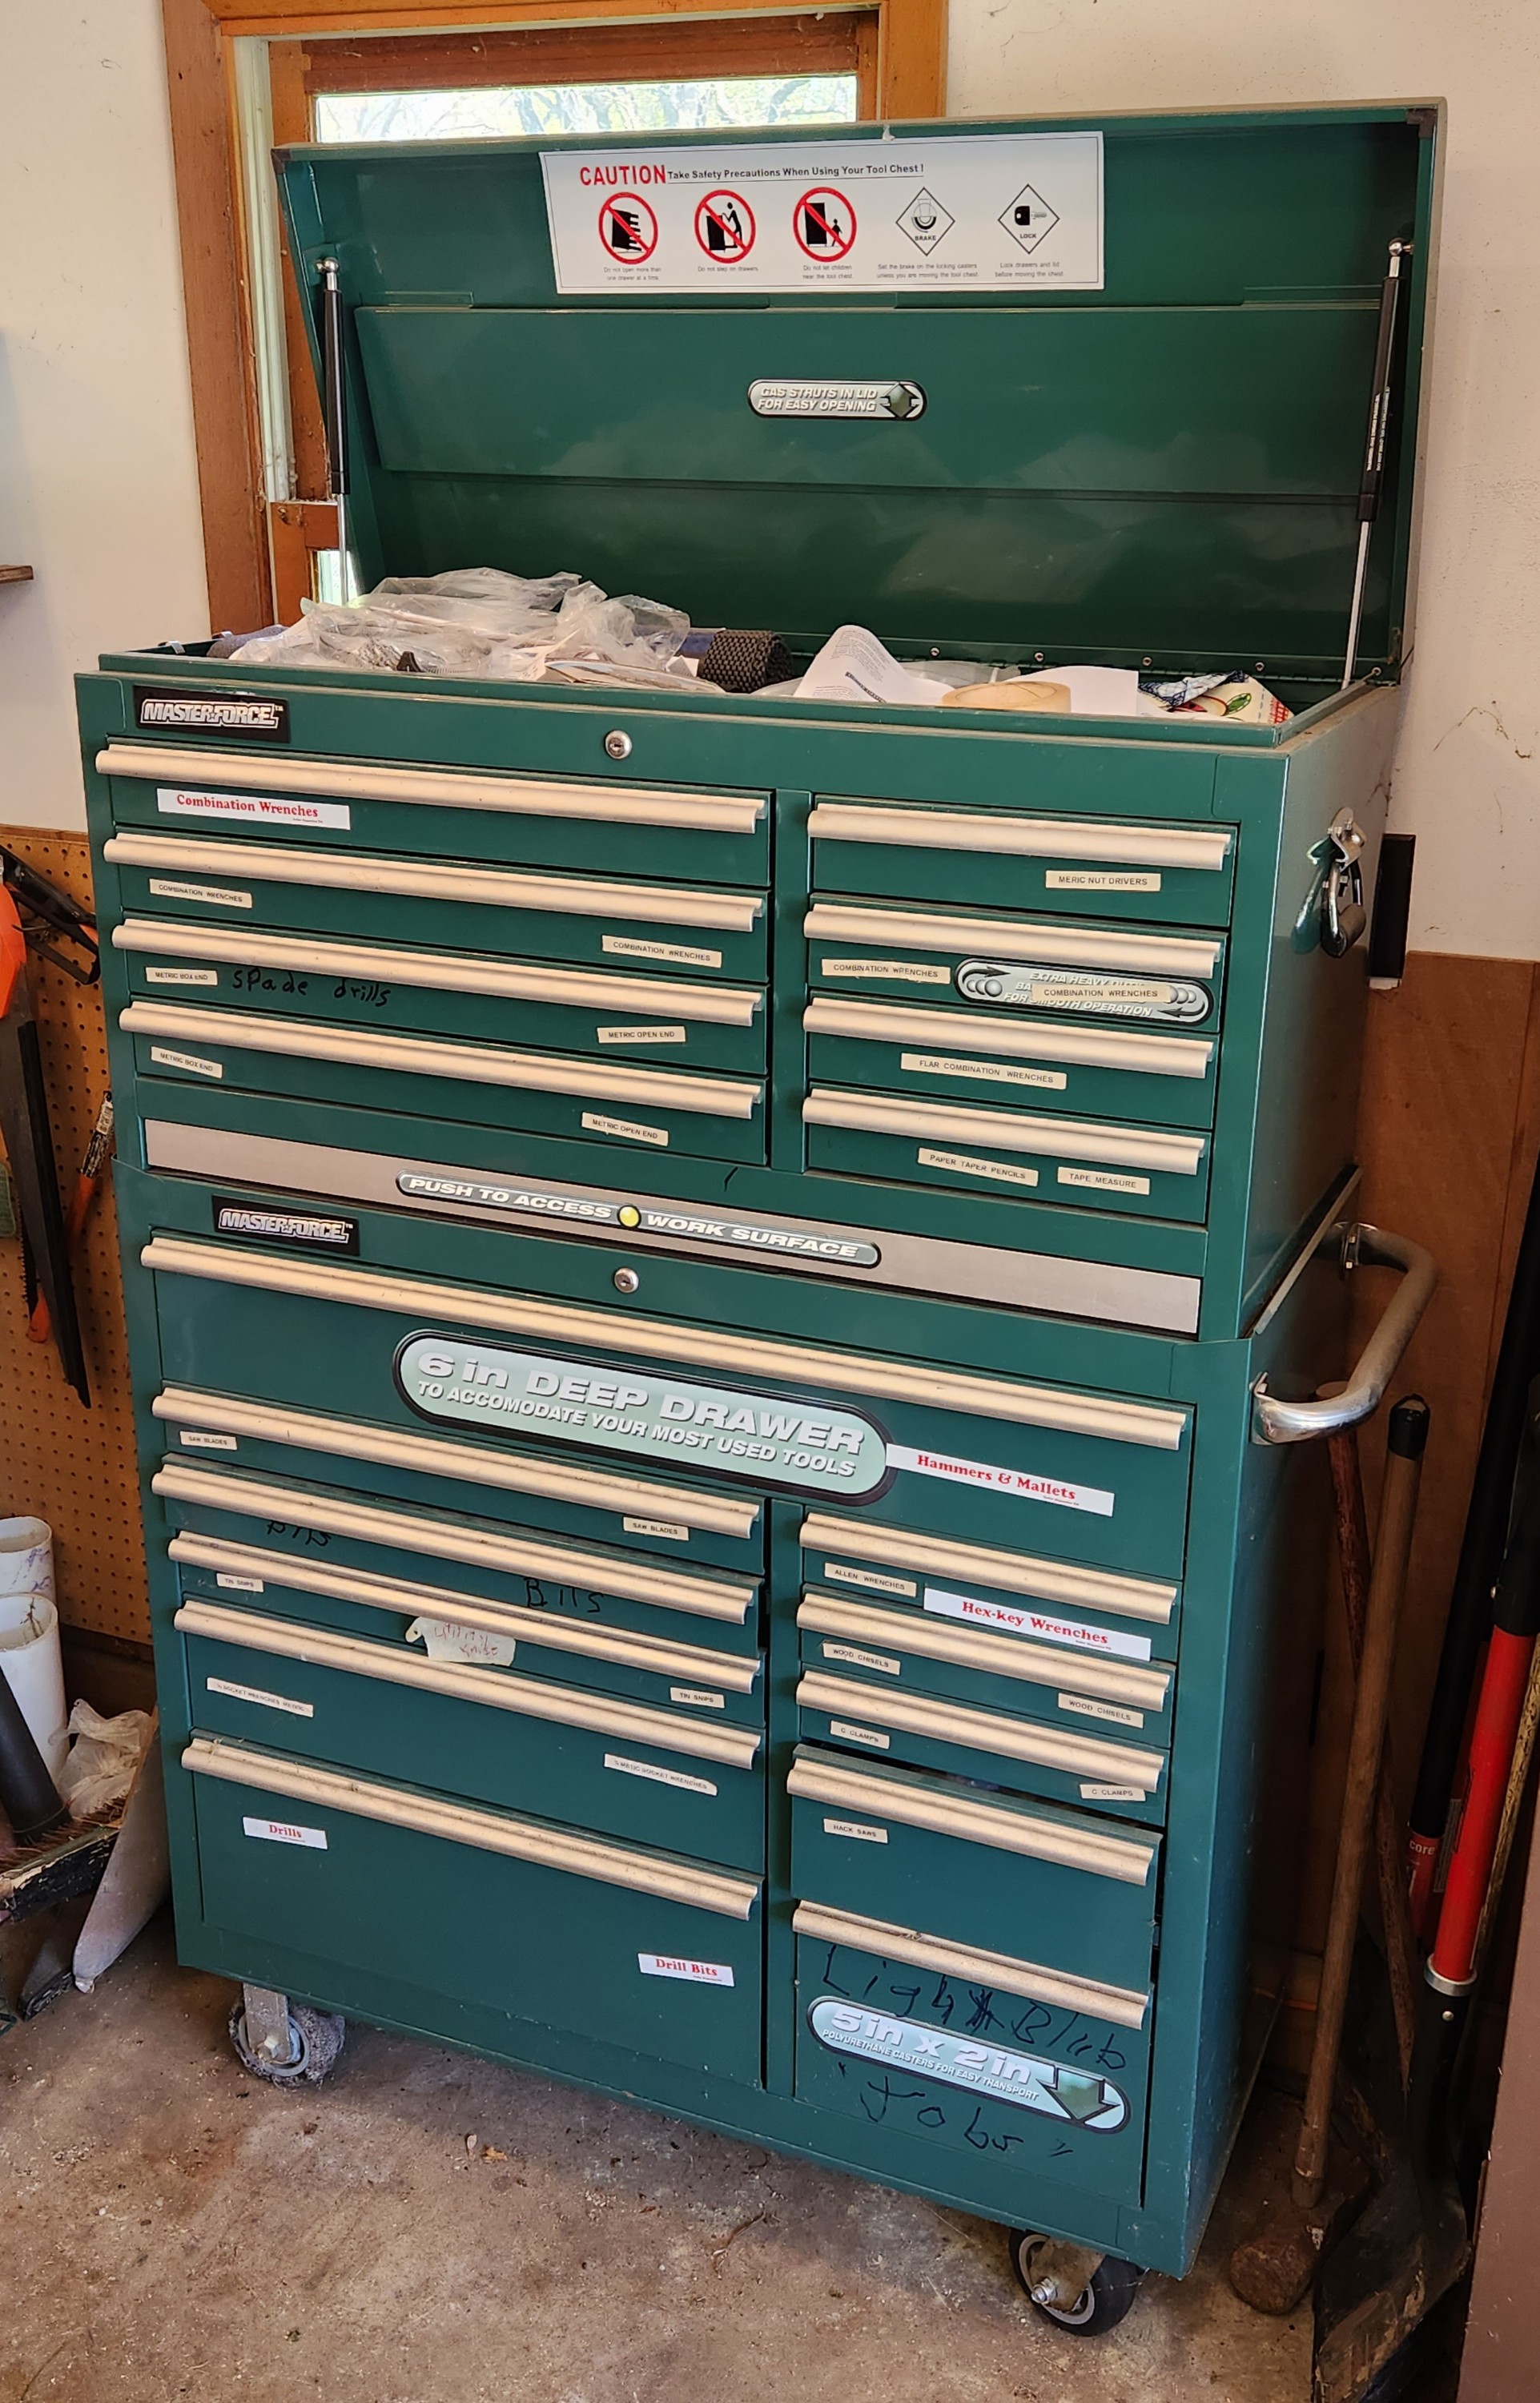 Item: Masterforce 19 Drawer Roller Tool Chest